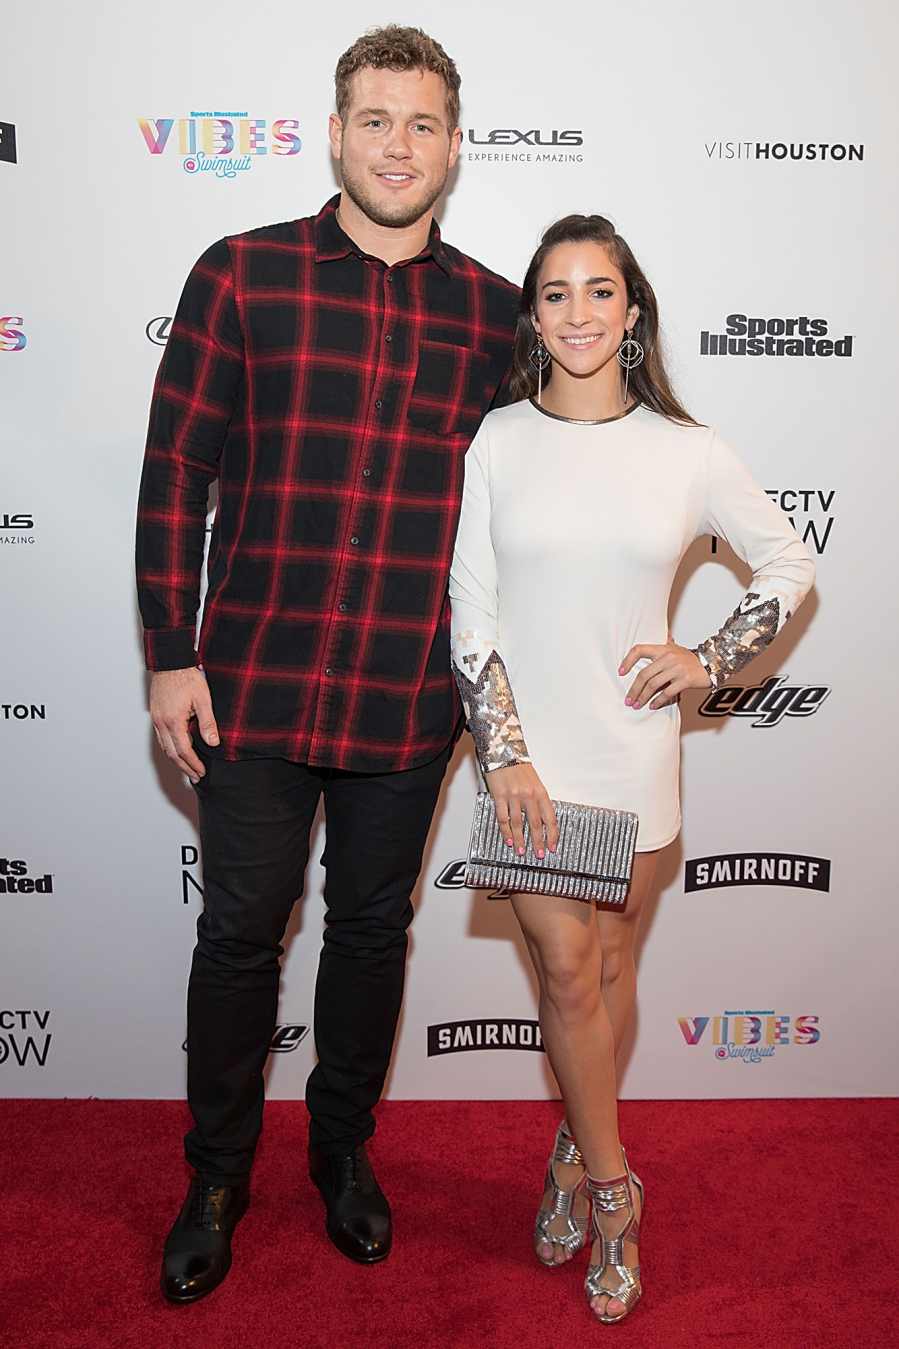 Stars Who Have Dated Bachelor Nation Colton Underwood and Aly Raisman